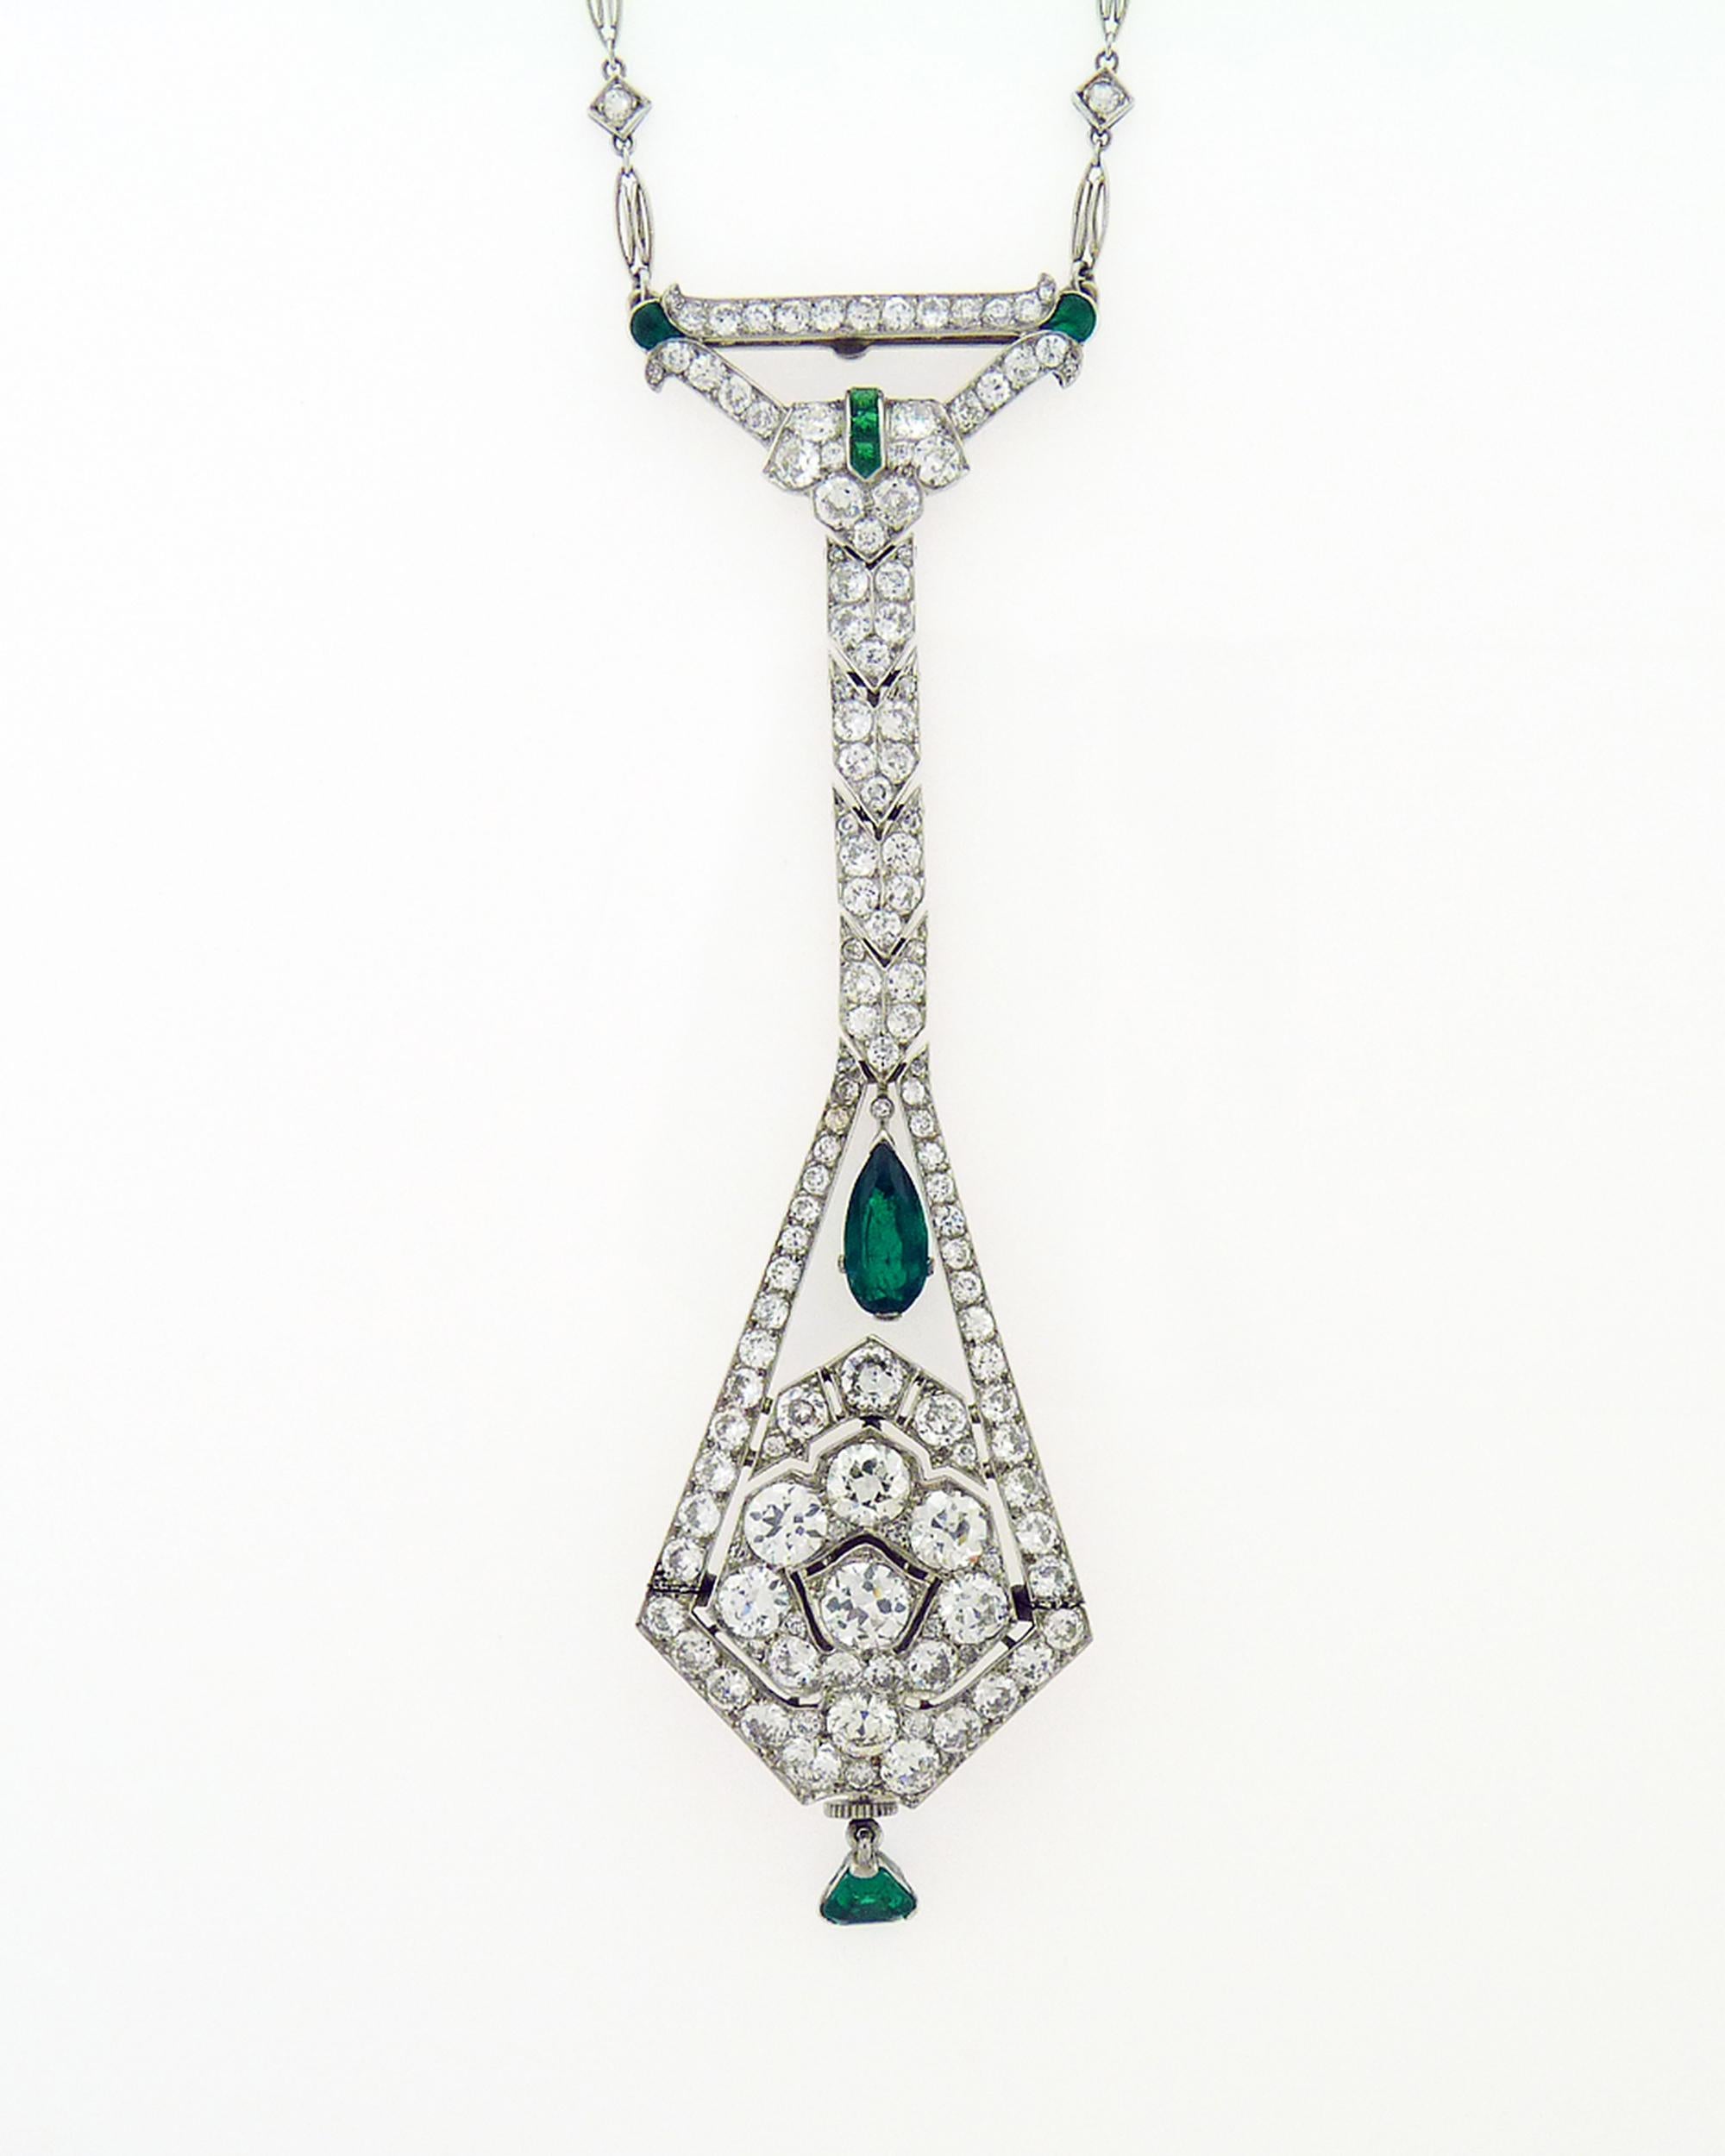 A beautiful and unique watch pendant on a chain. Originally a lapel watch from Art Deco period, converted into a pendant necklace. The watch on reverse is of manual movement, with leaf blued steel hands and Arabic numerals.
Old European-cut diamonds